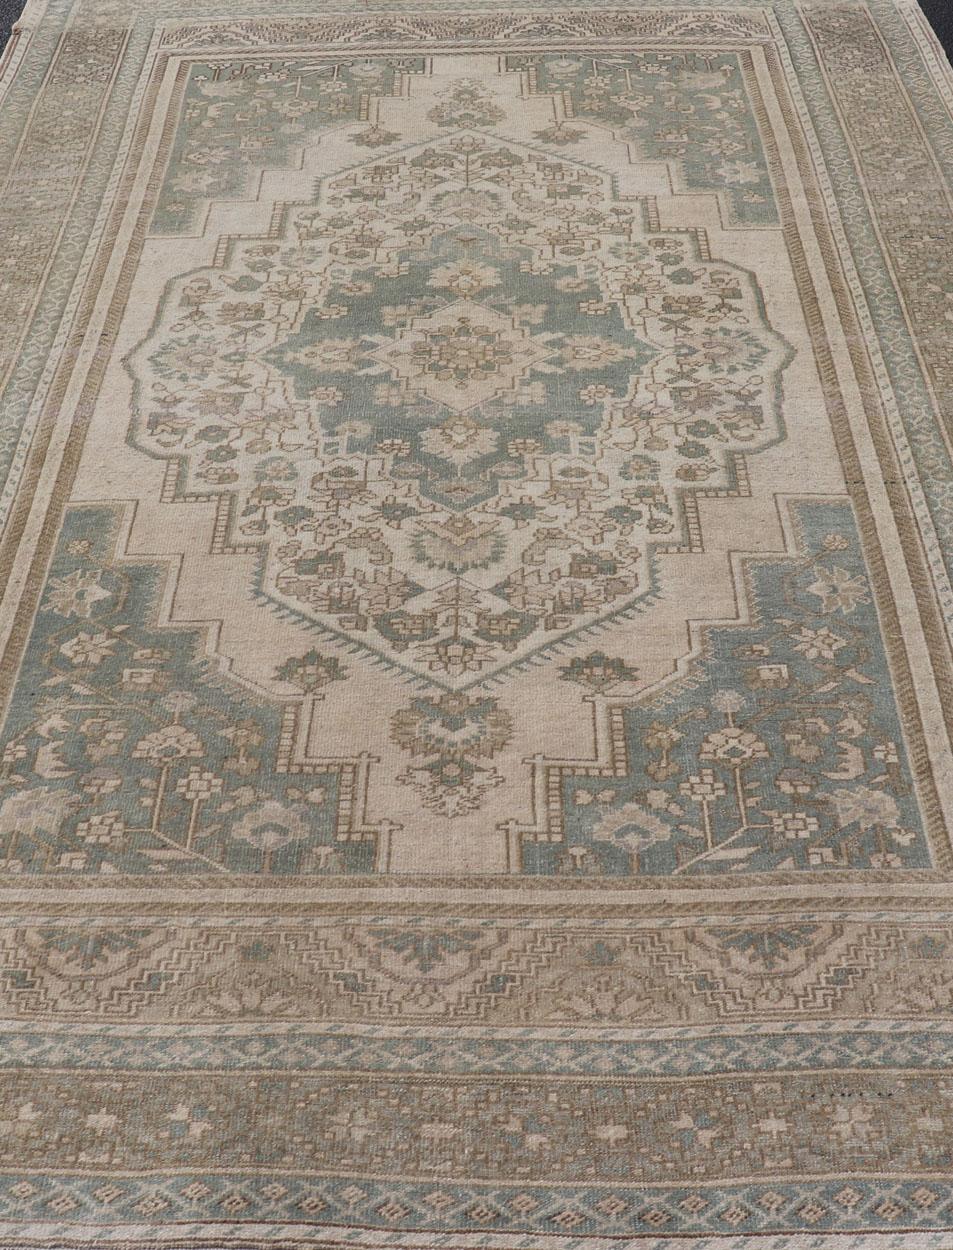 Turkish Oushak Vintage Medallion Rug in Light Blue-Green, Tan, Taupe, and Cream For Sale 5